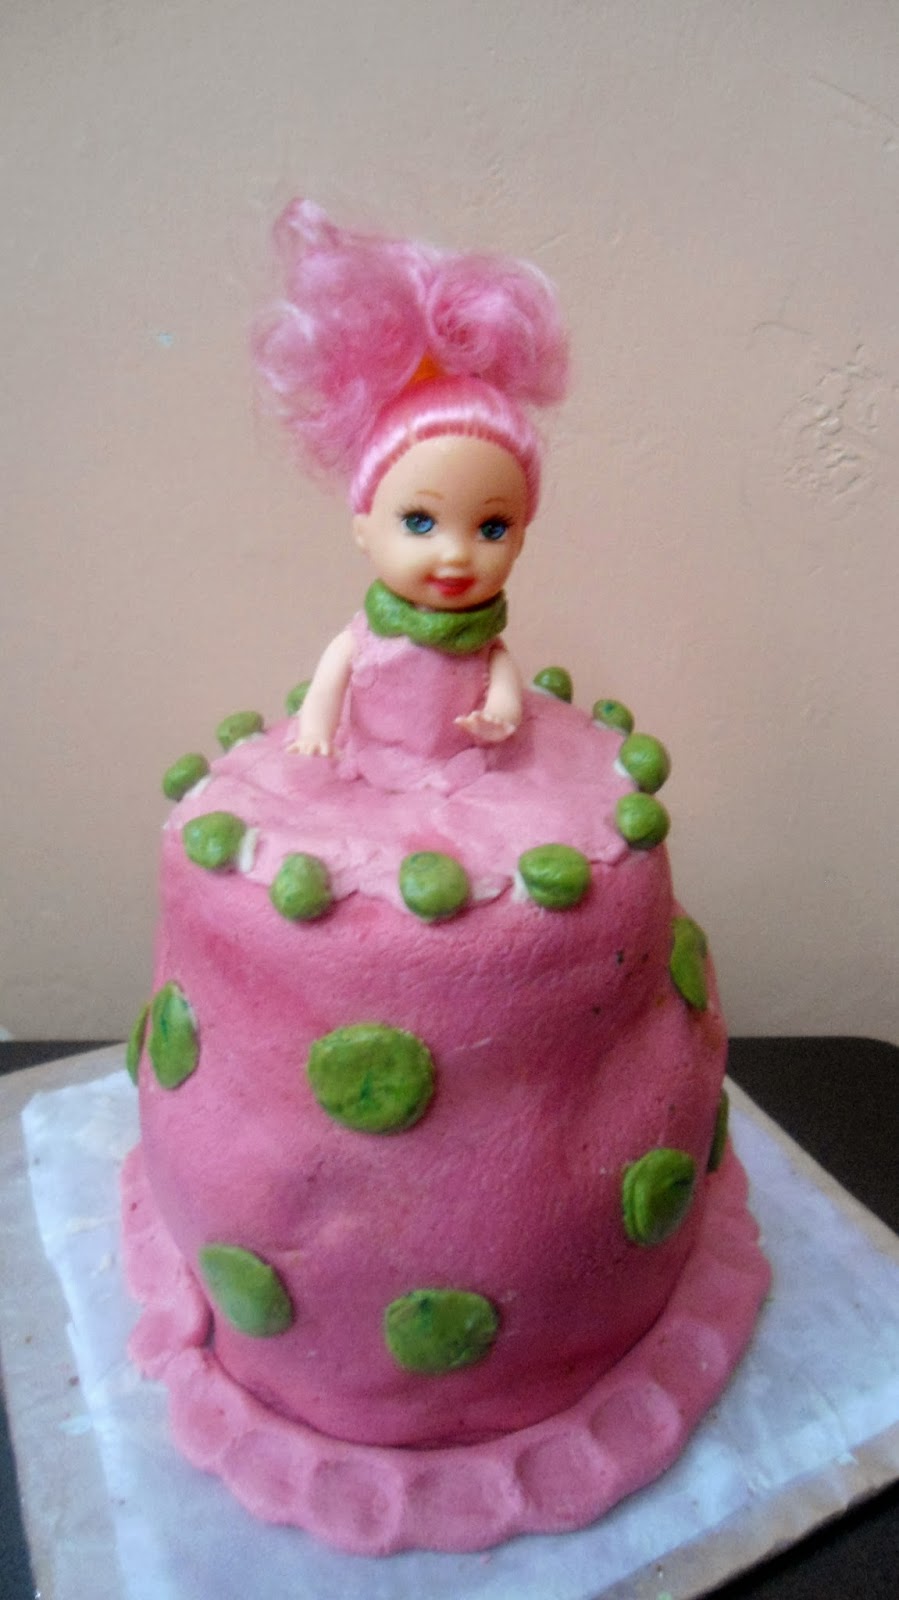 doll cake with fondant